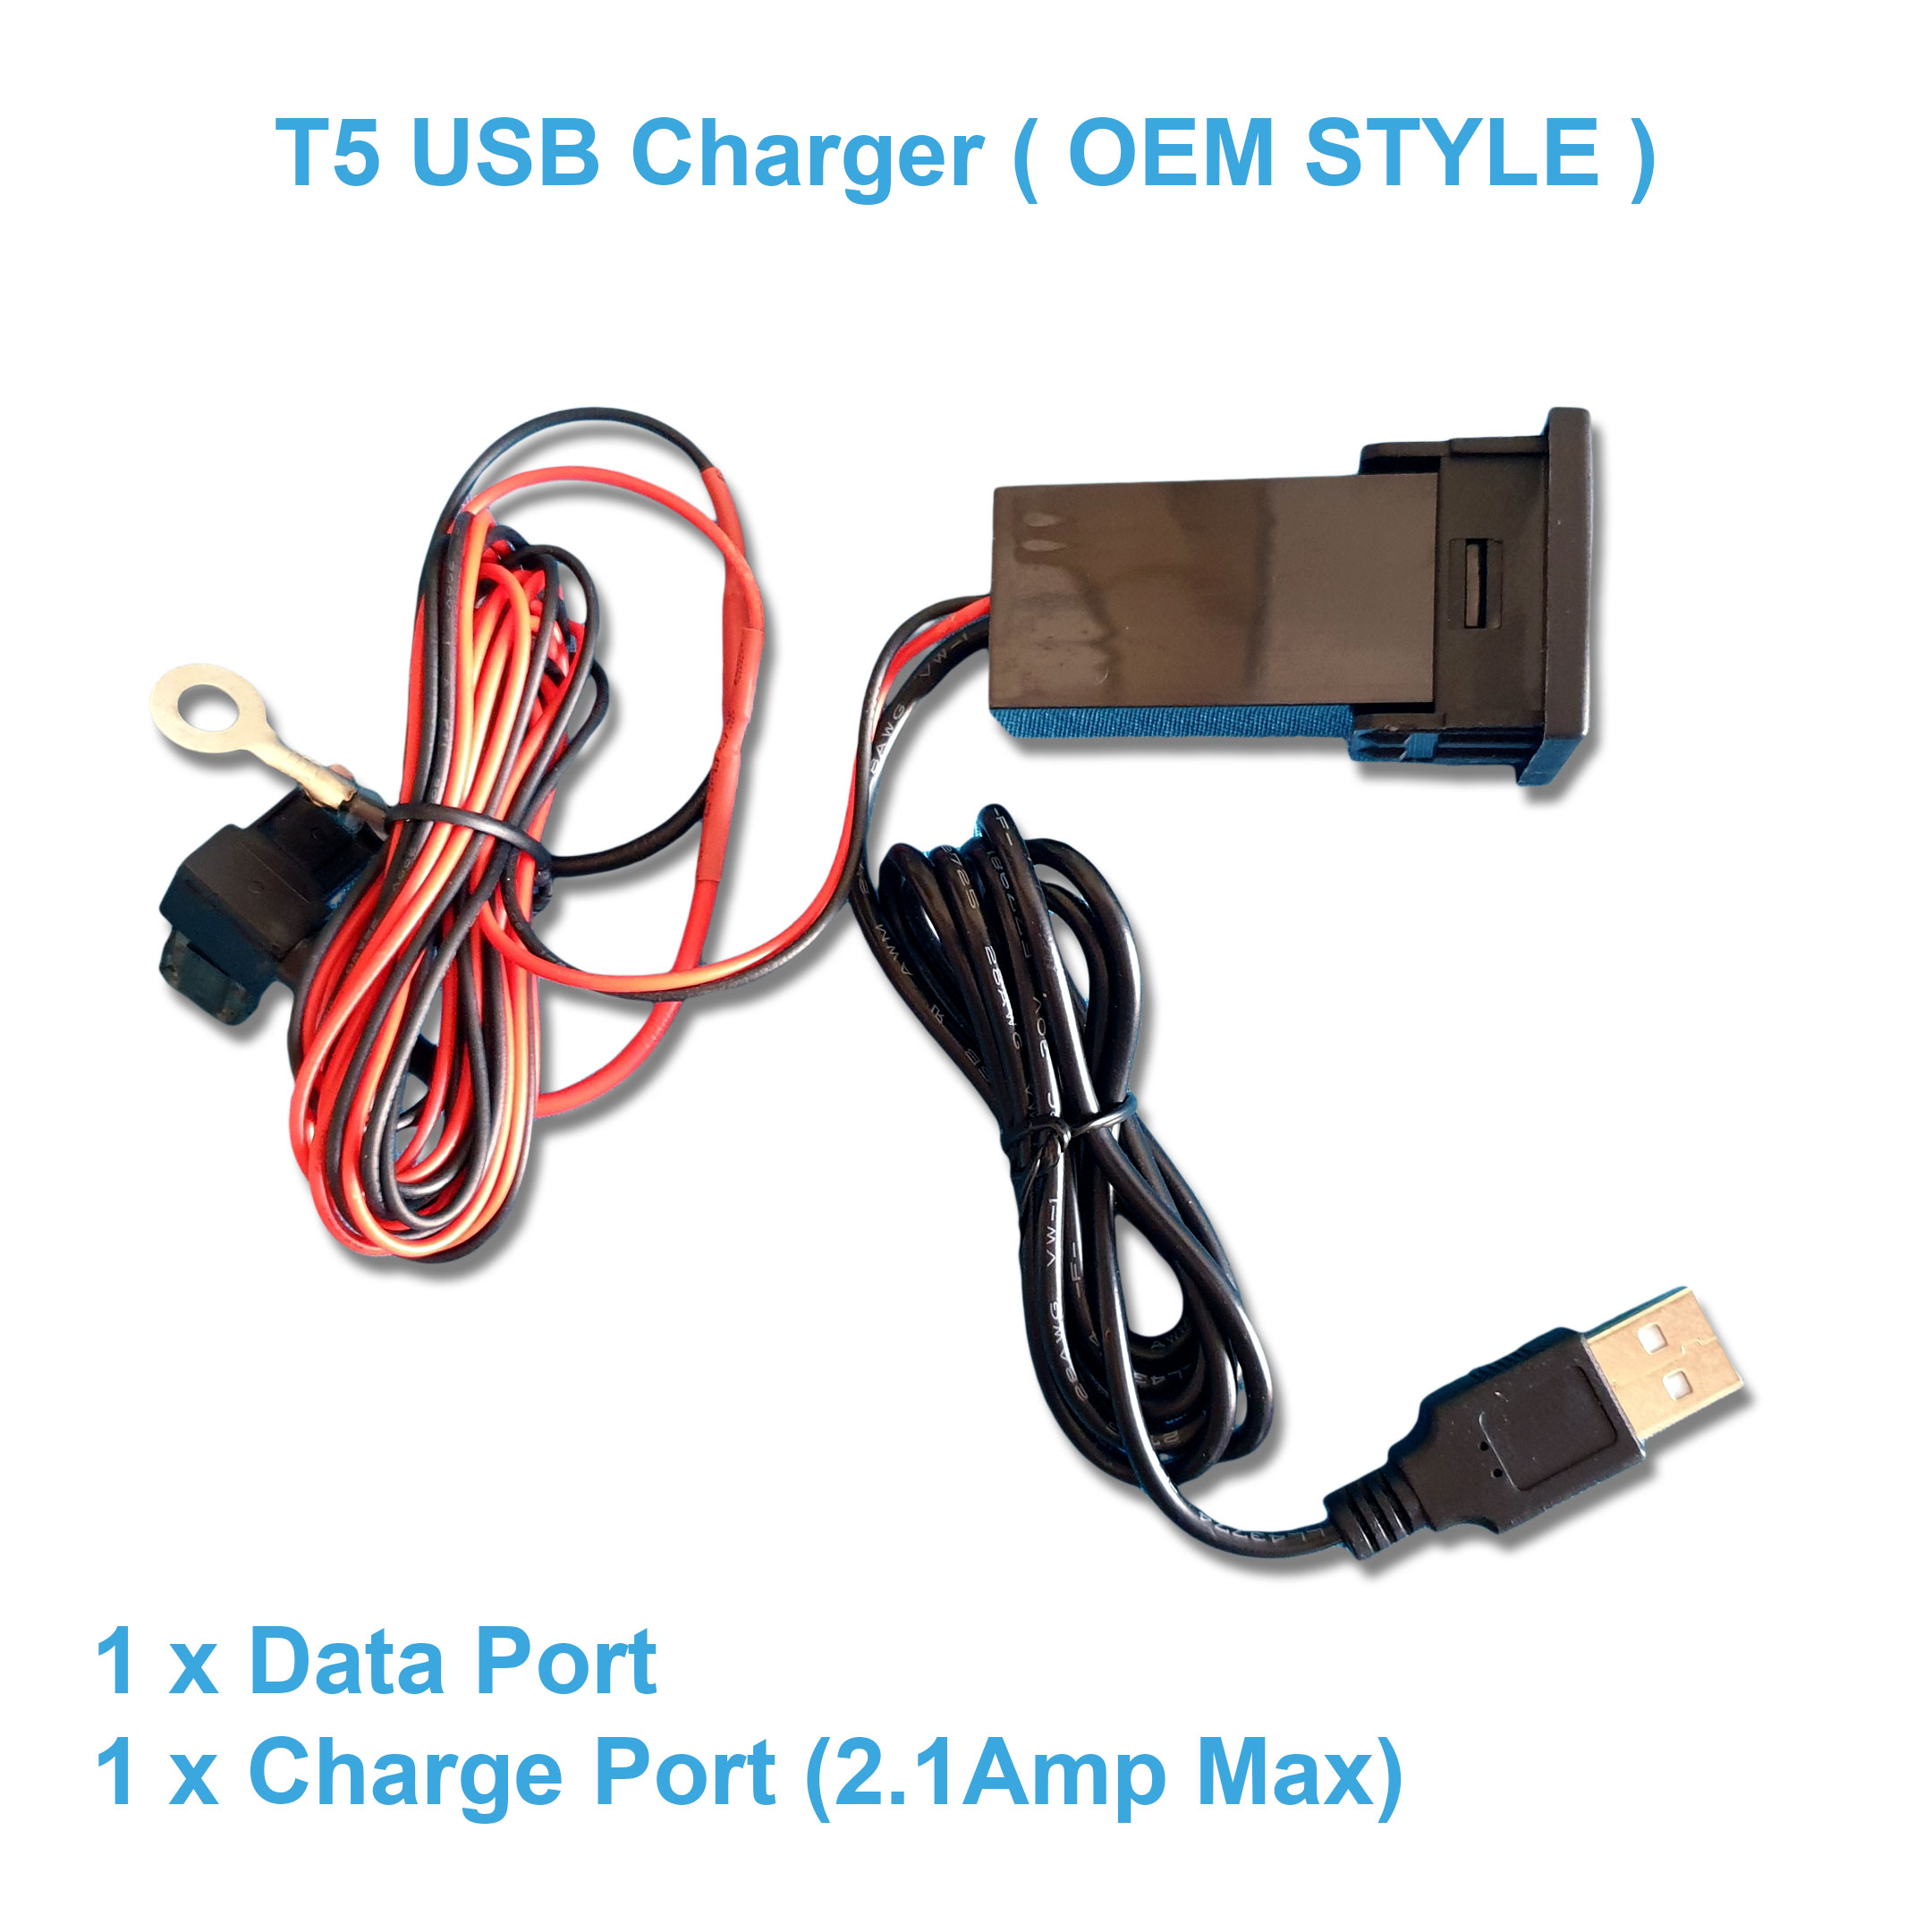 BLUE OEM Style VW T5 DUAL USB PHONE CHARGER with USB Extension